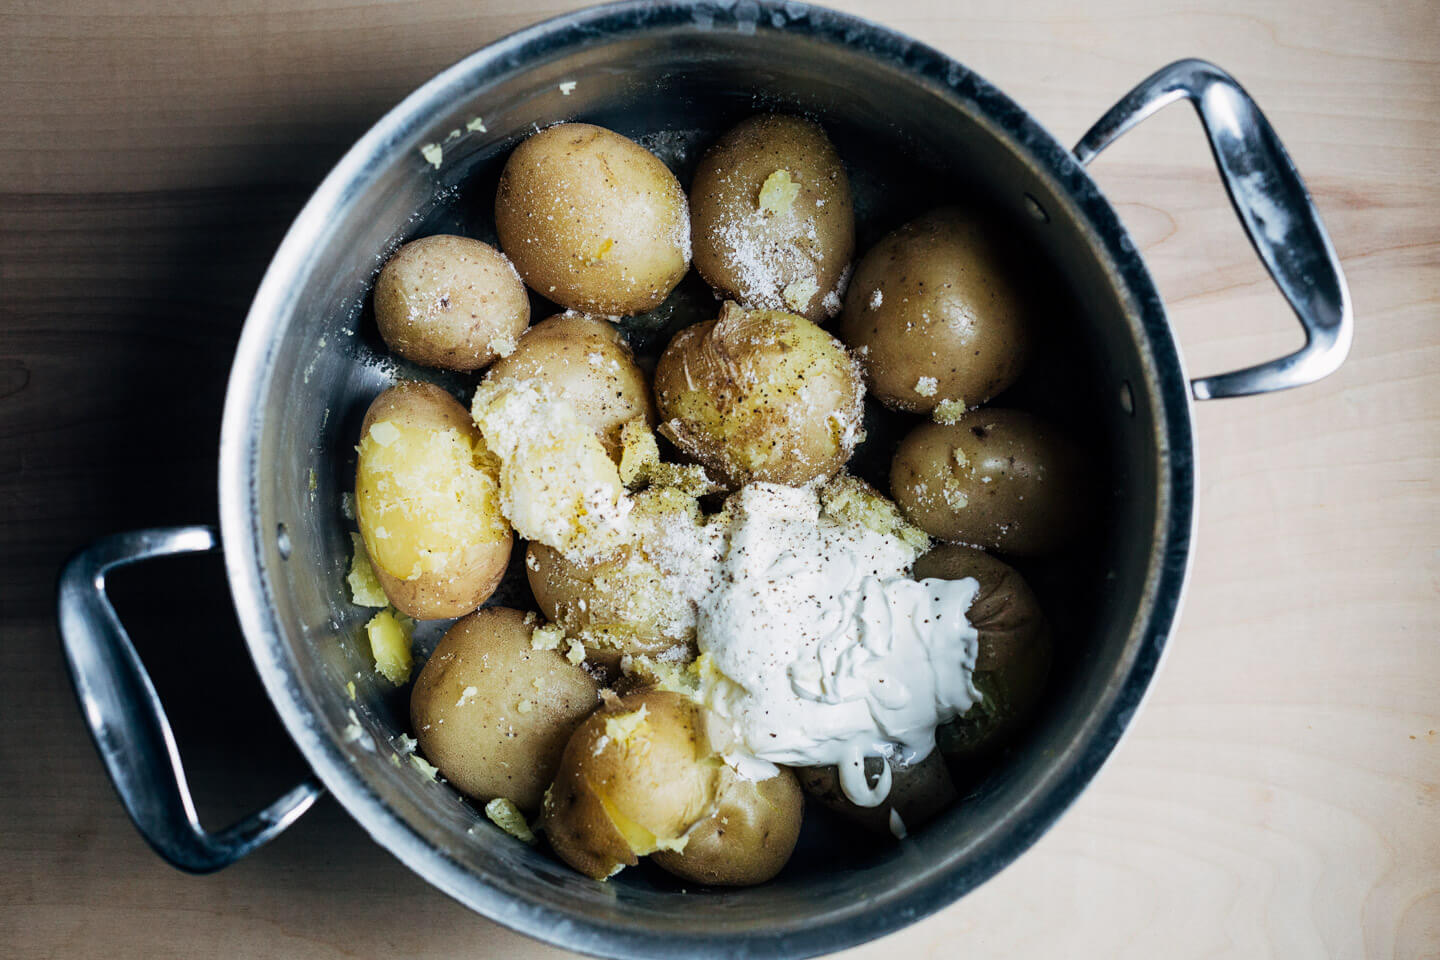 Cooked potatoes in a pot with a big dollop of sour cream and salt sprinkled on top.